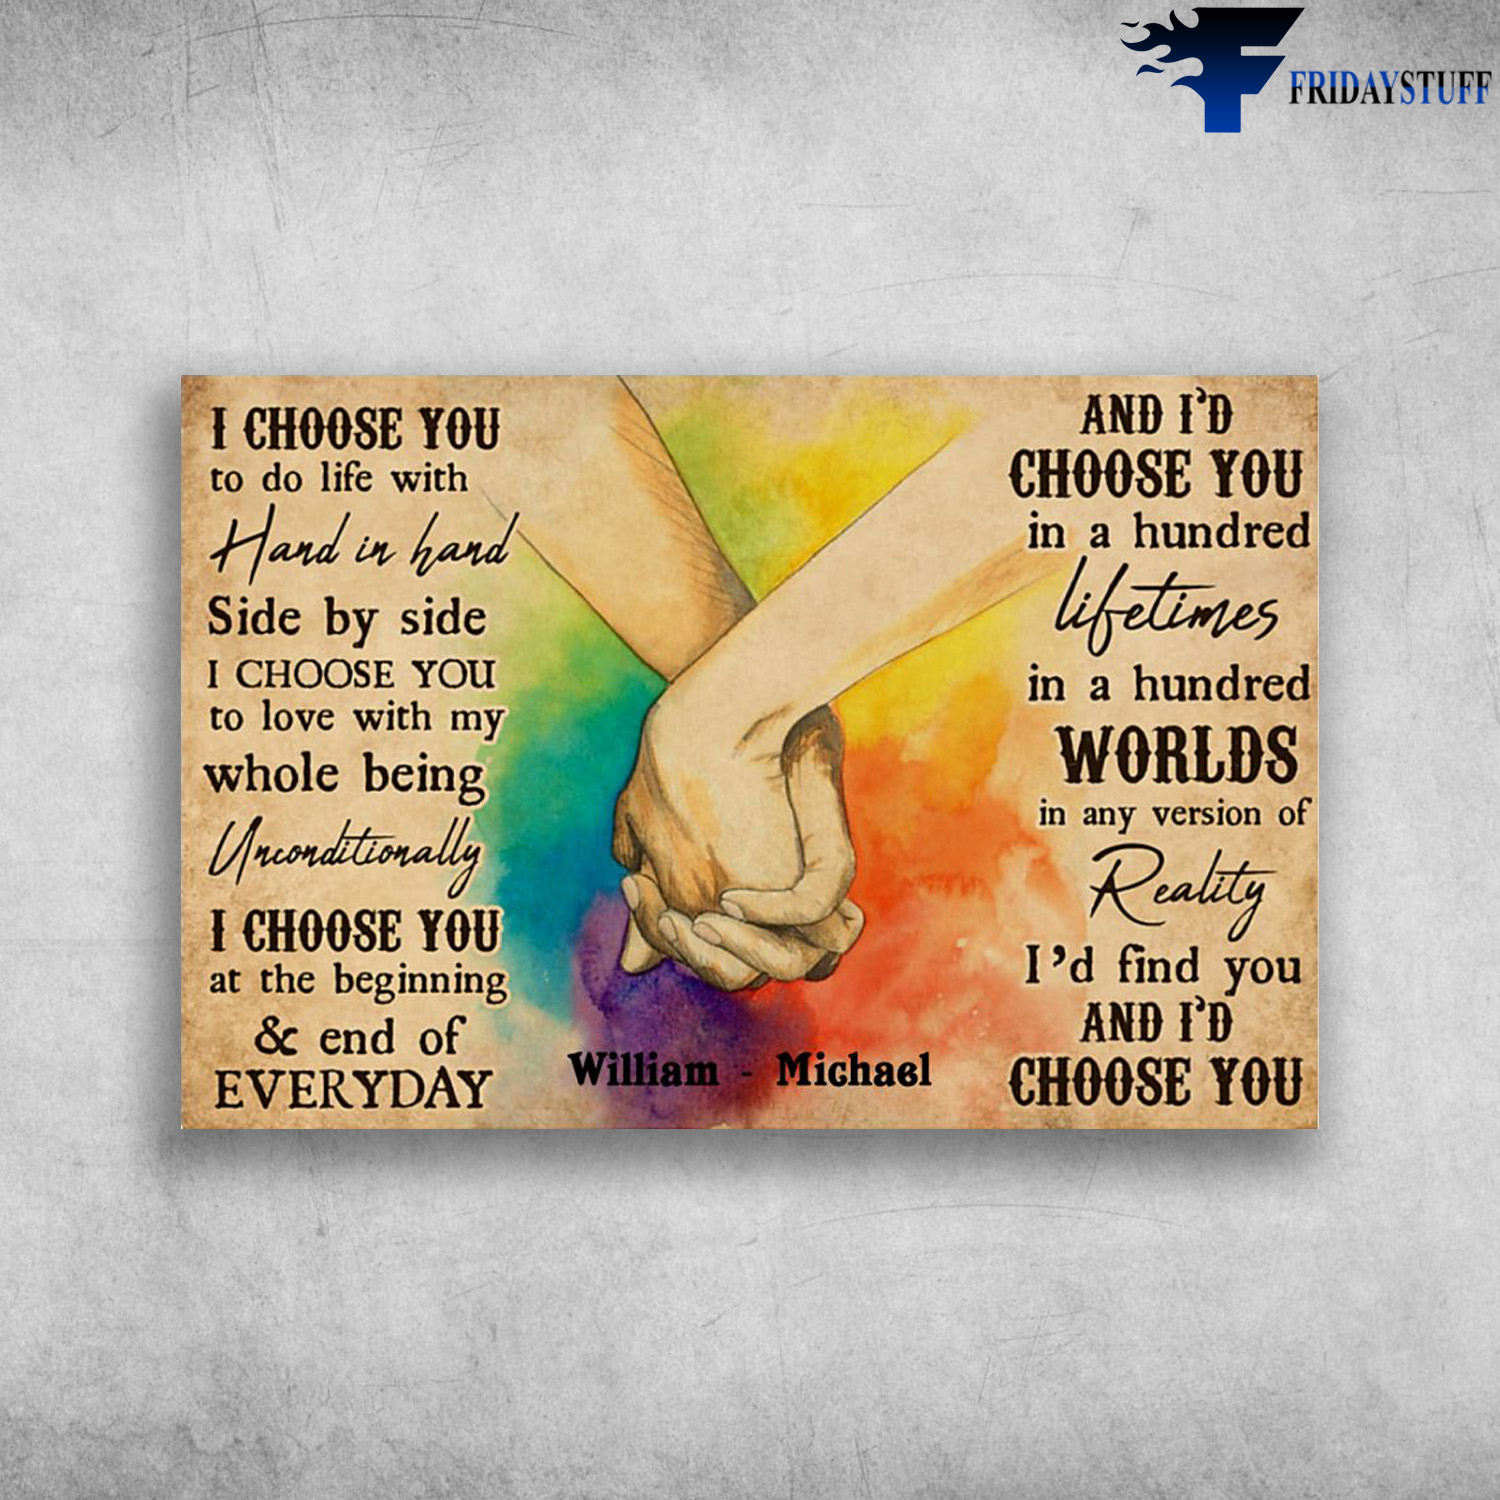 The LGBT Hands Holding - I Choose You To Do Life With Hand In Hand, Side By Side, I Choose You To Love With My Whole Being Unconditionally, I Choose You At The Beginning And End Of Everyday, And I Choose You In A Hundred Lifetimes, In A Hundred Worlds